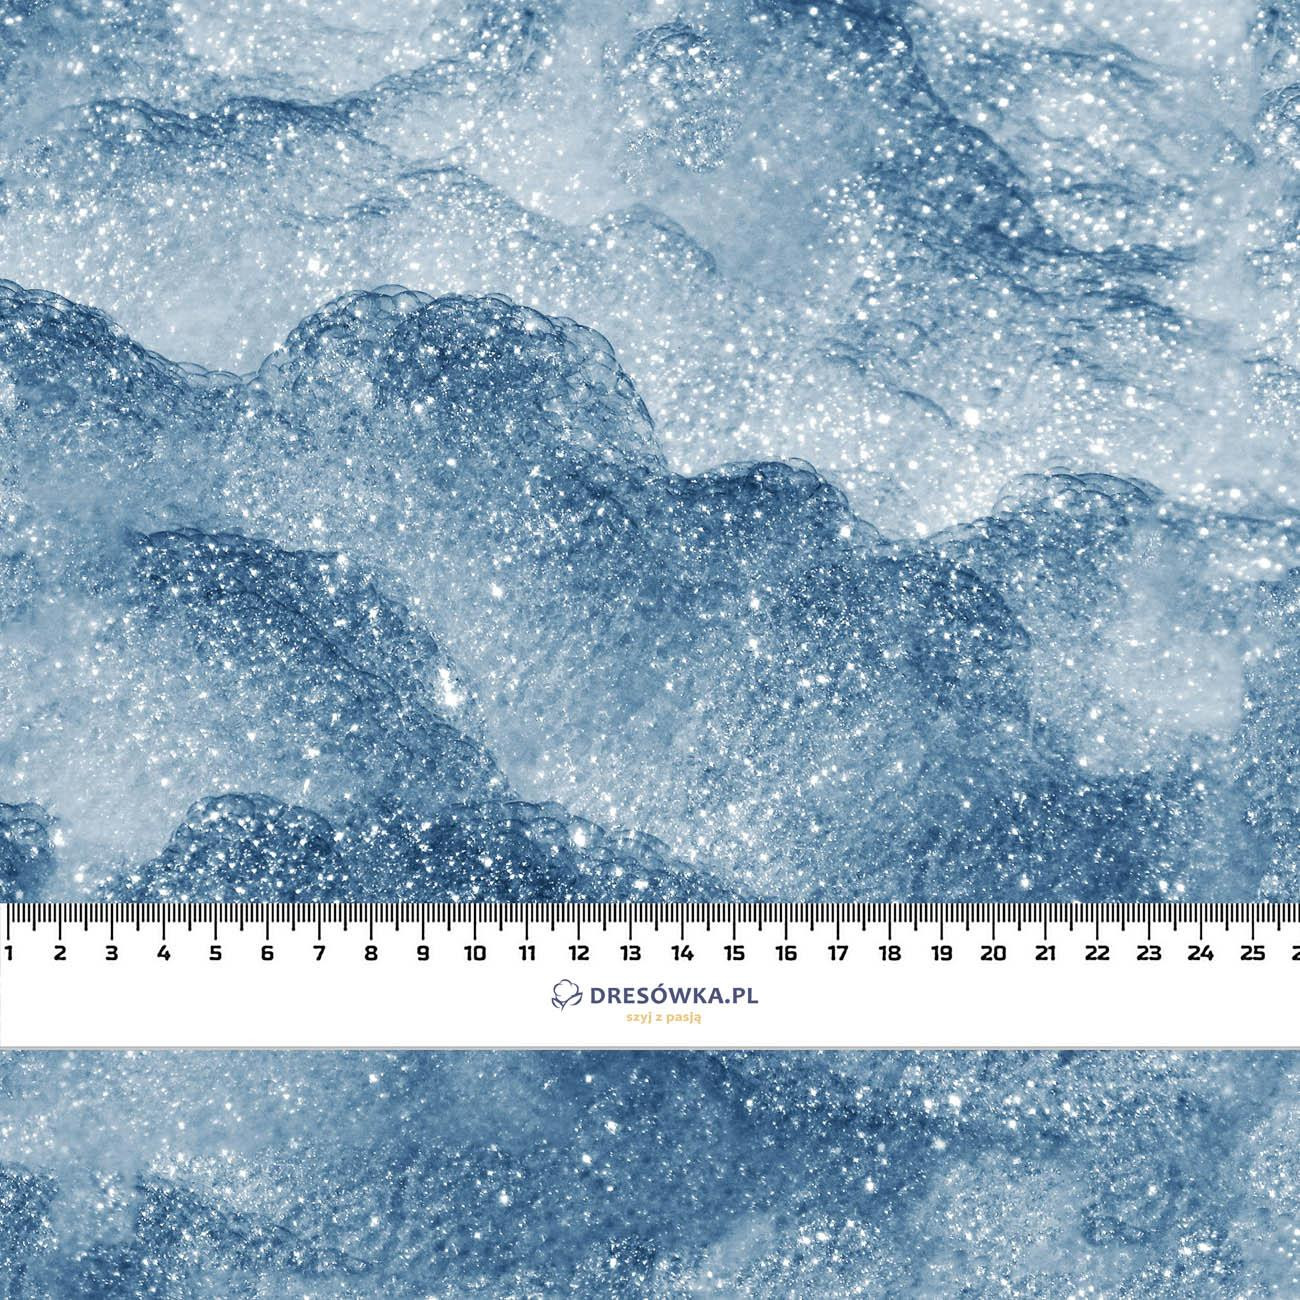 SNOW / sea blue (PAINTED ON GLASS) - looped knit fabric